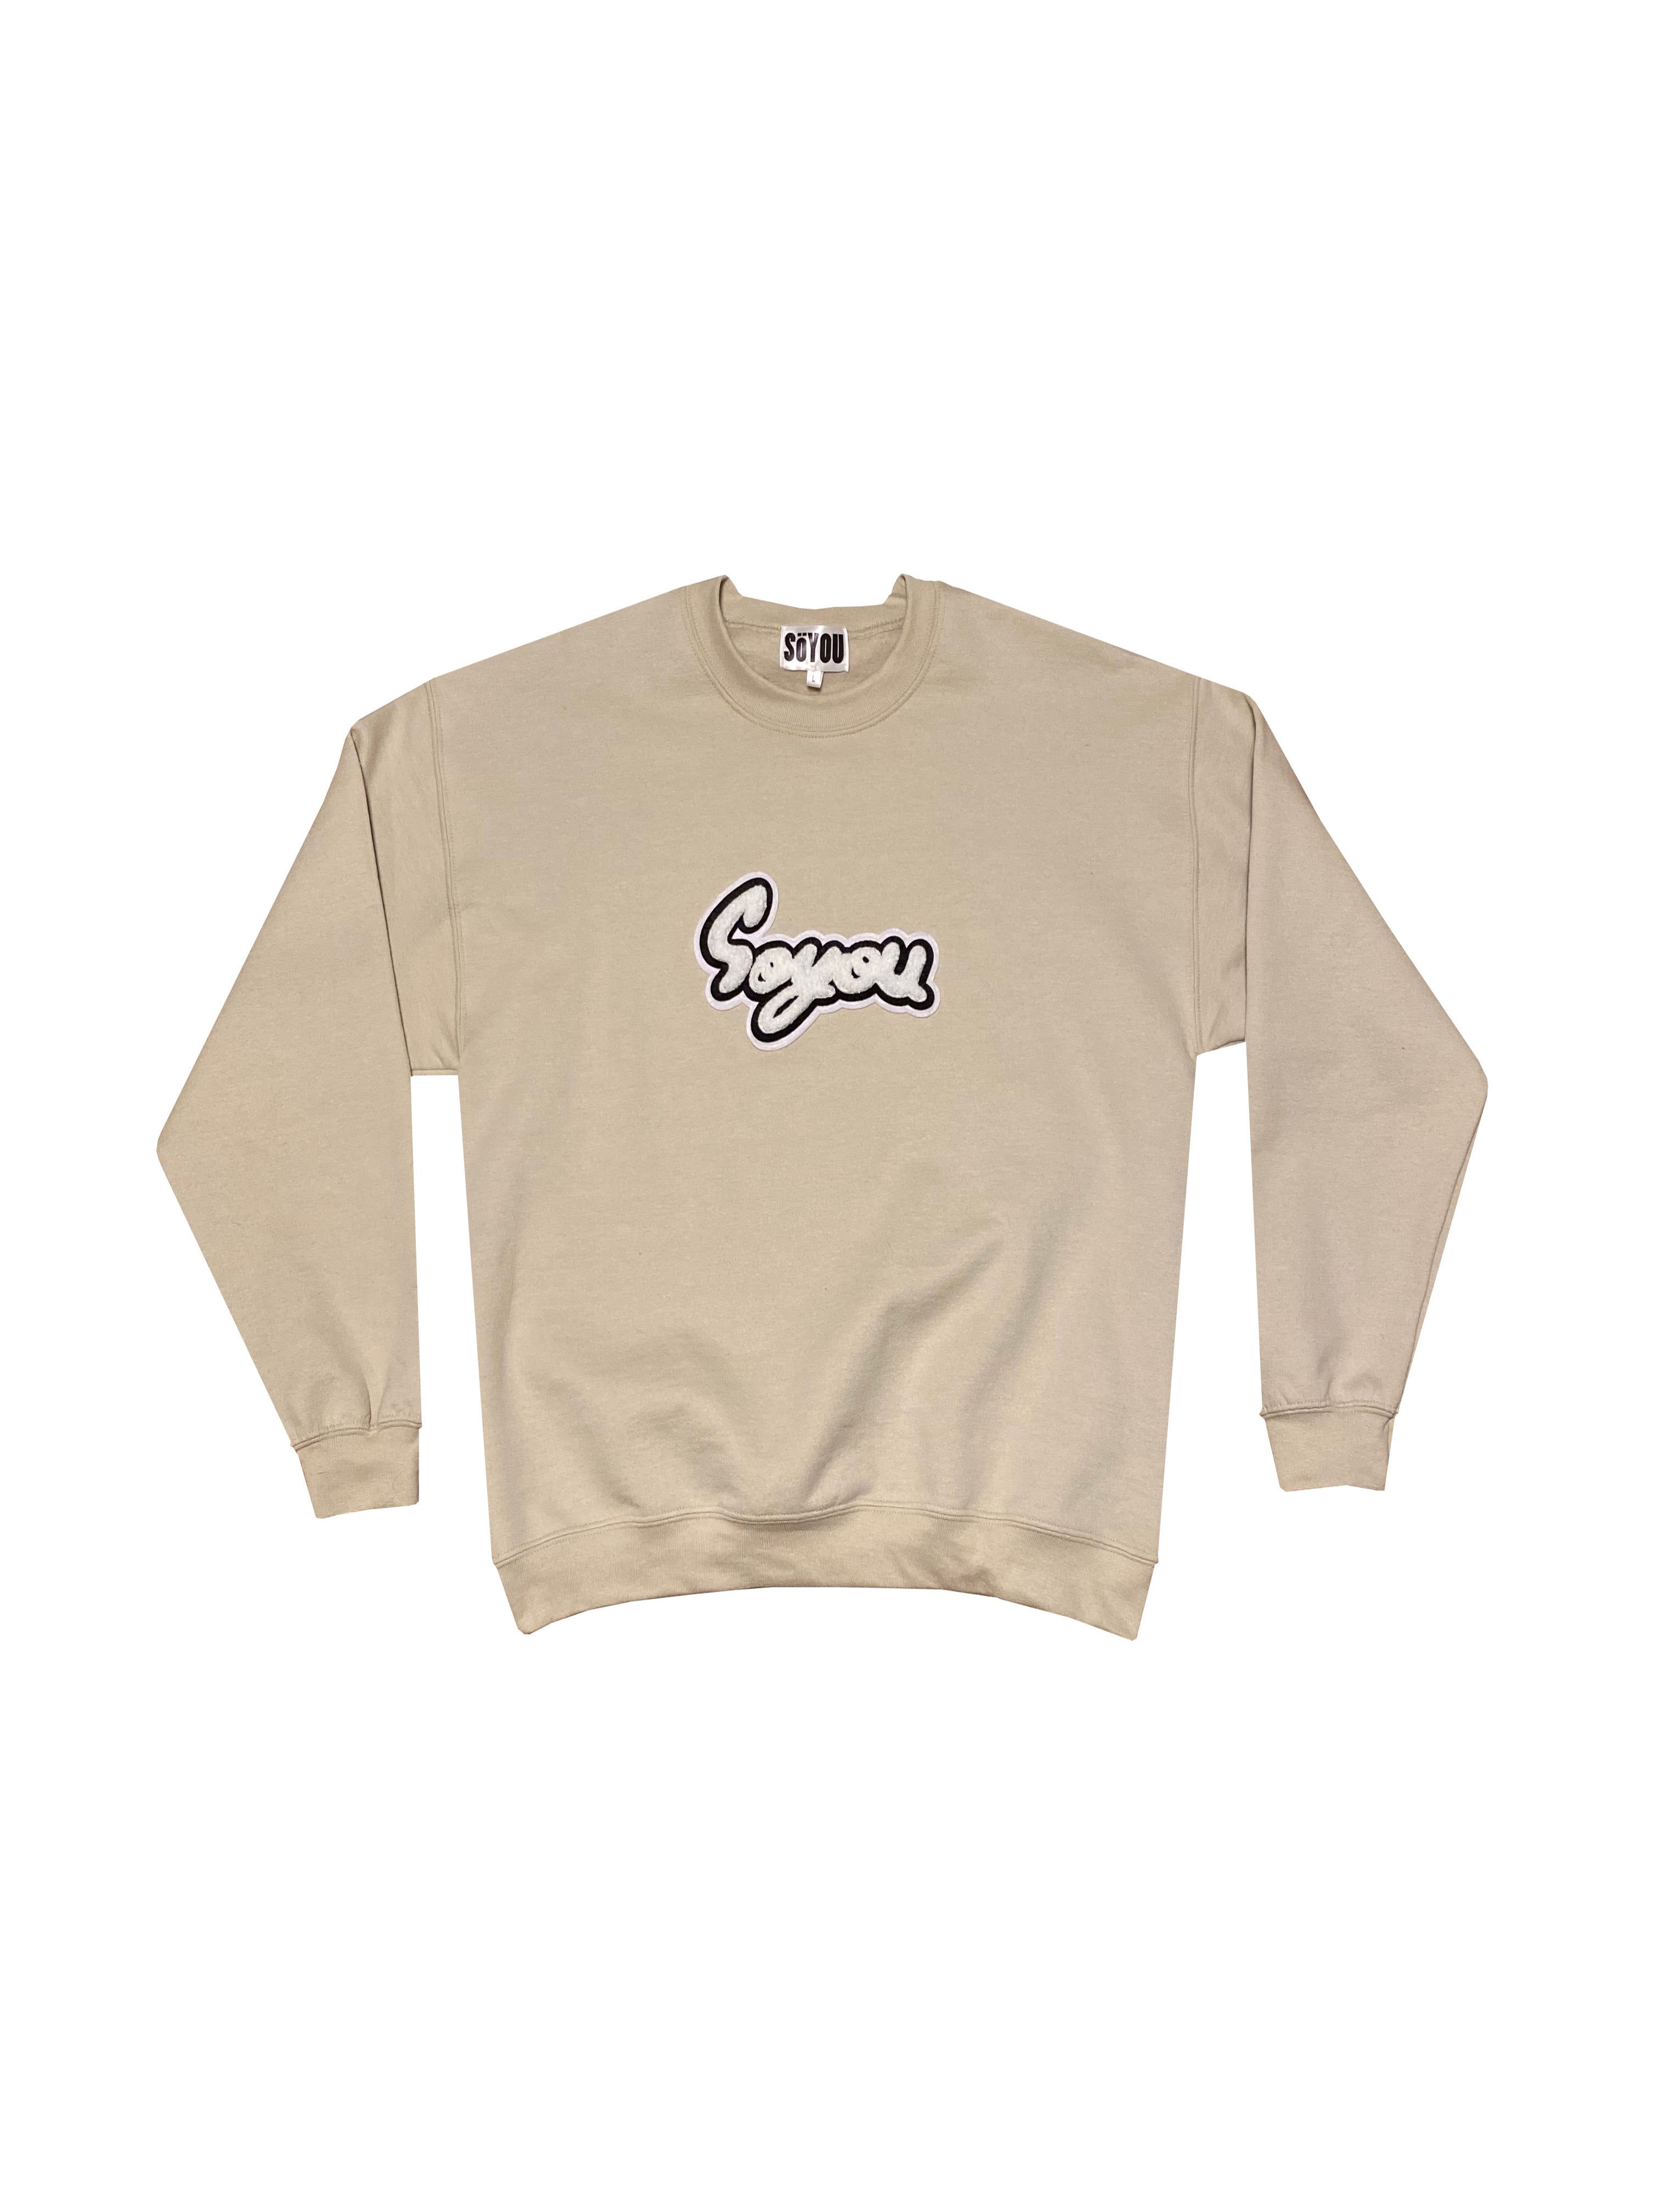 Cold Caterpillar-Sweater-SoYou Clothing